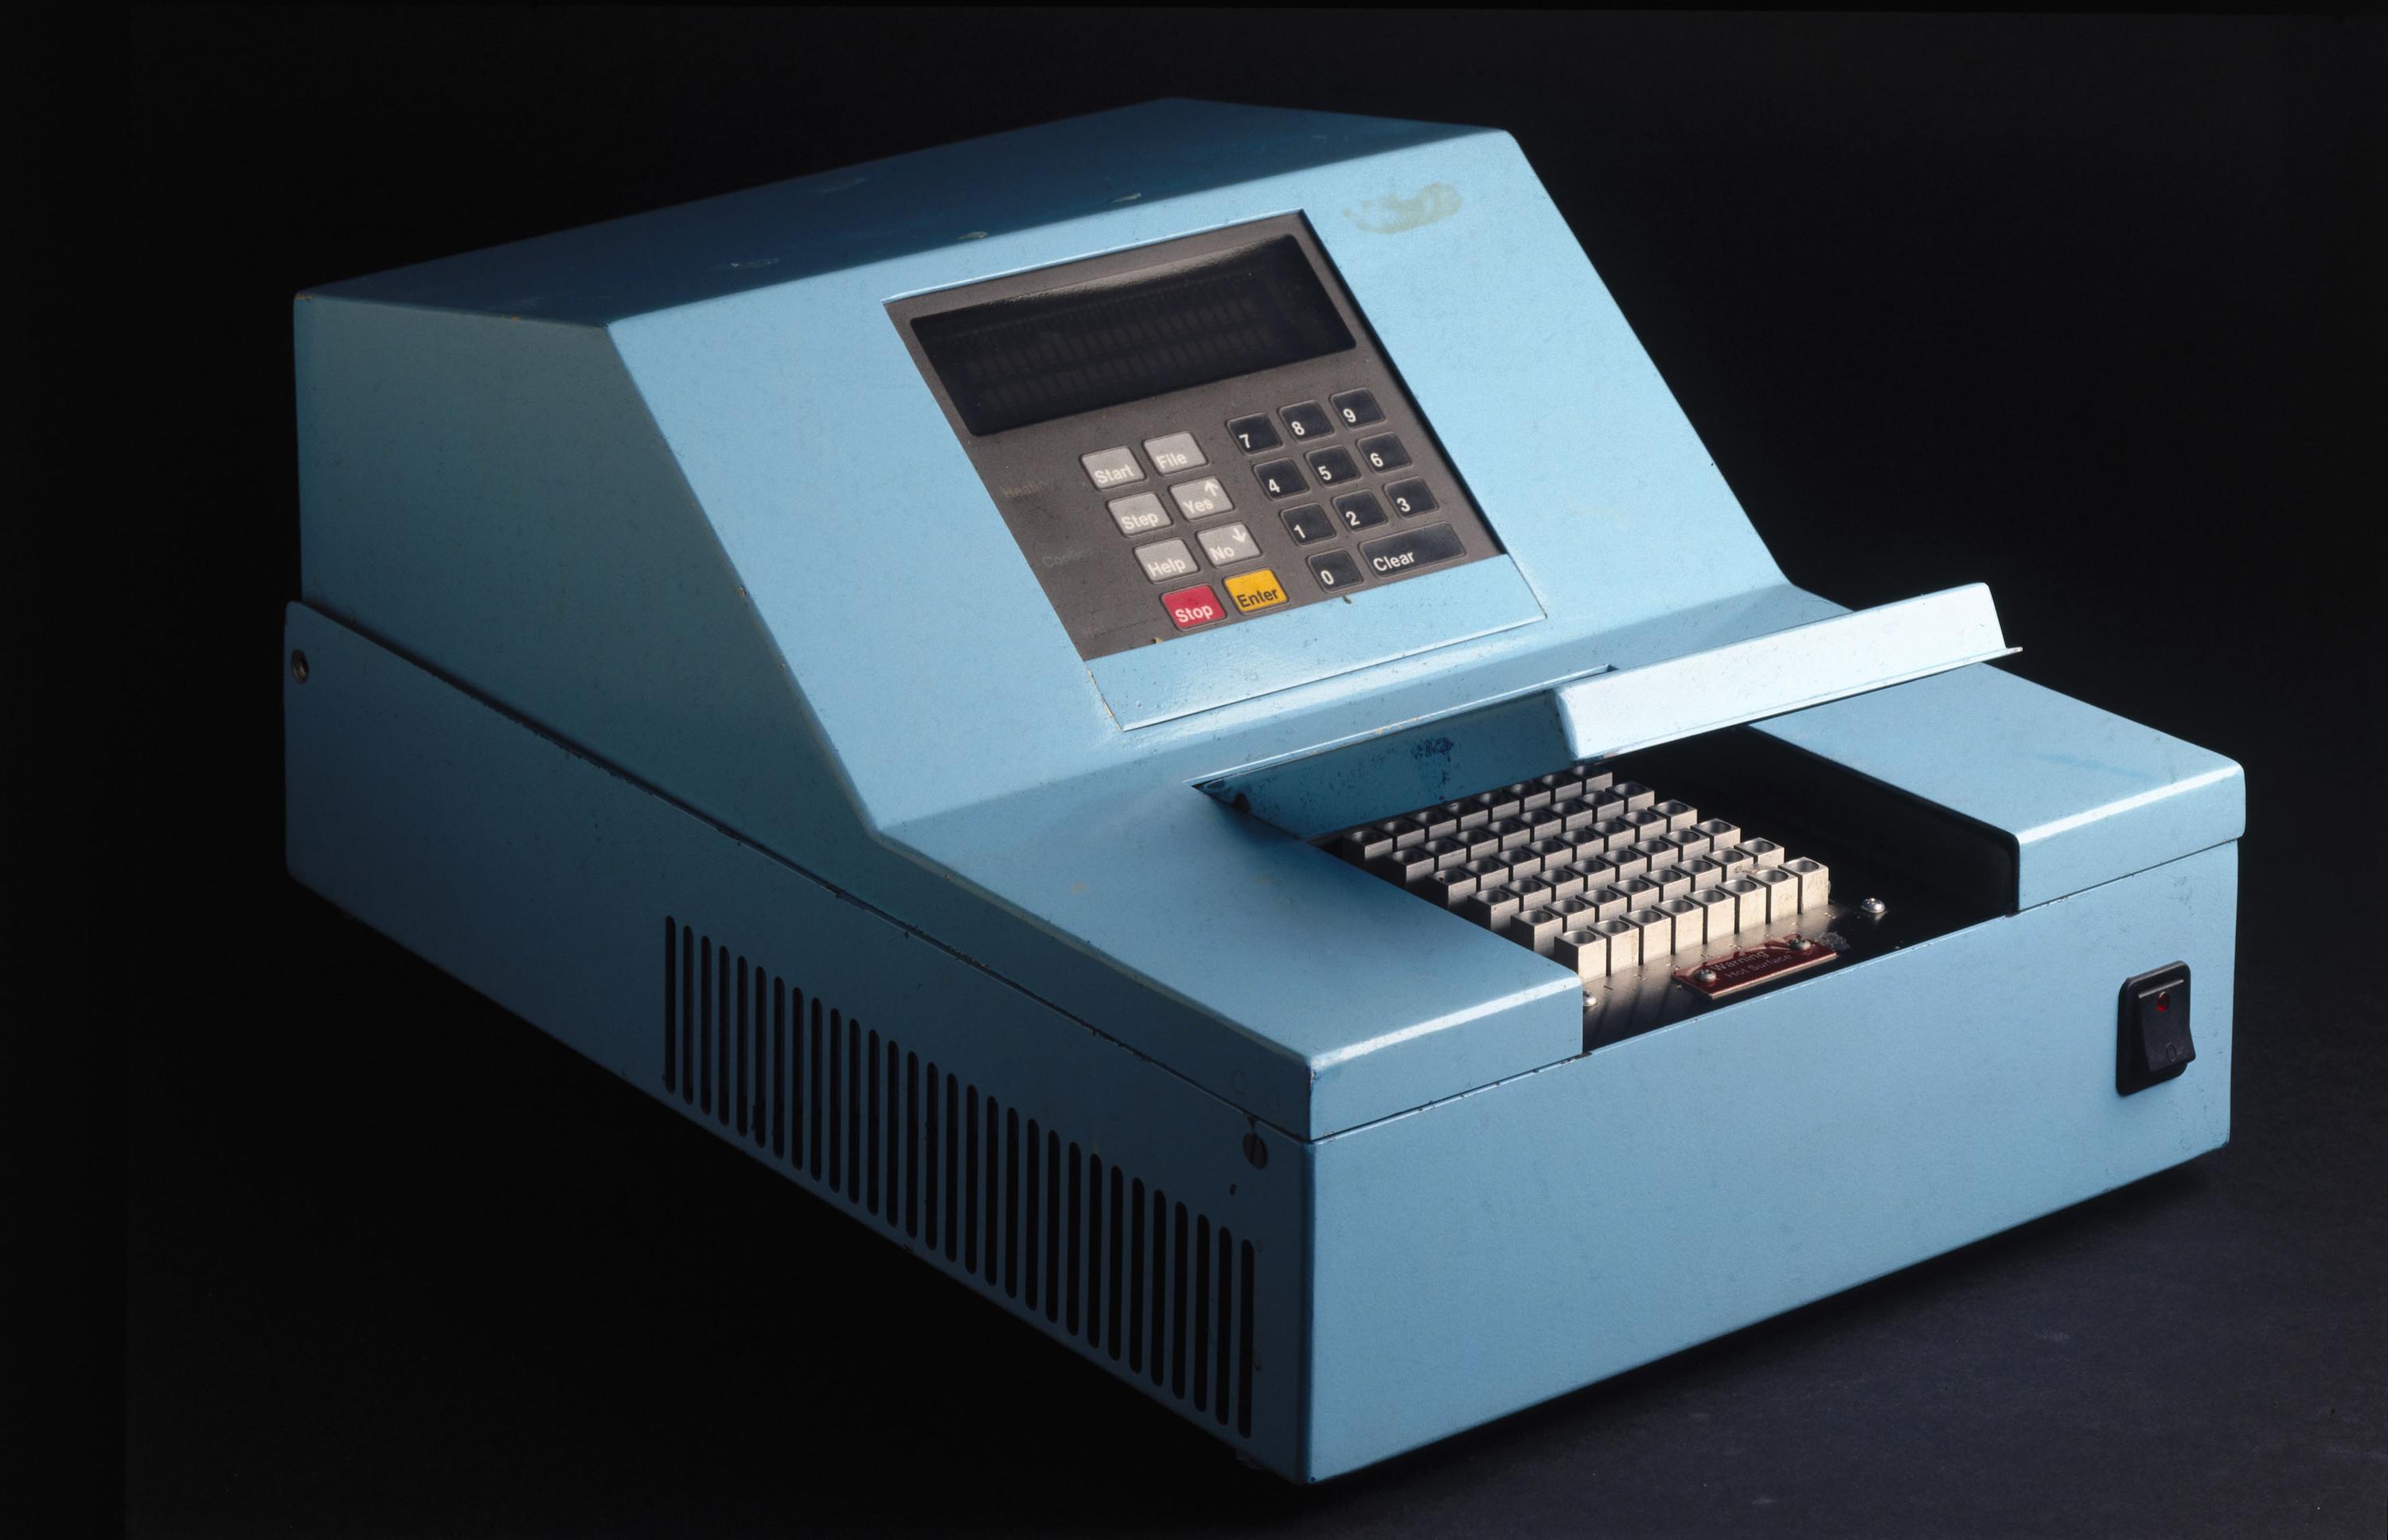 Prototype polymerase chain reaction (PCR) machine, unsigned, American, 1980-1989. This was the first model in which the software cycling controller is integrated with the thermal cycling block in a single instrument.